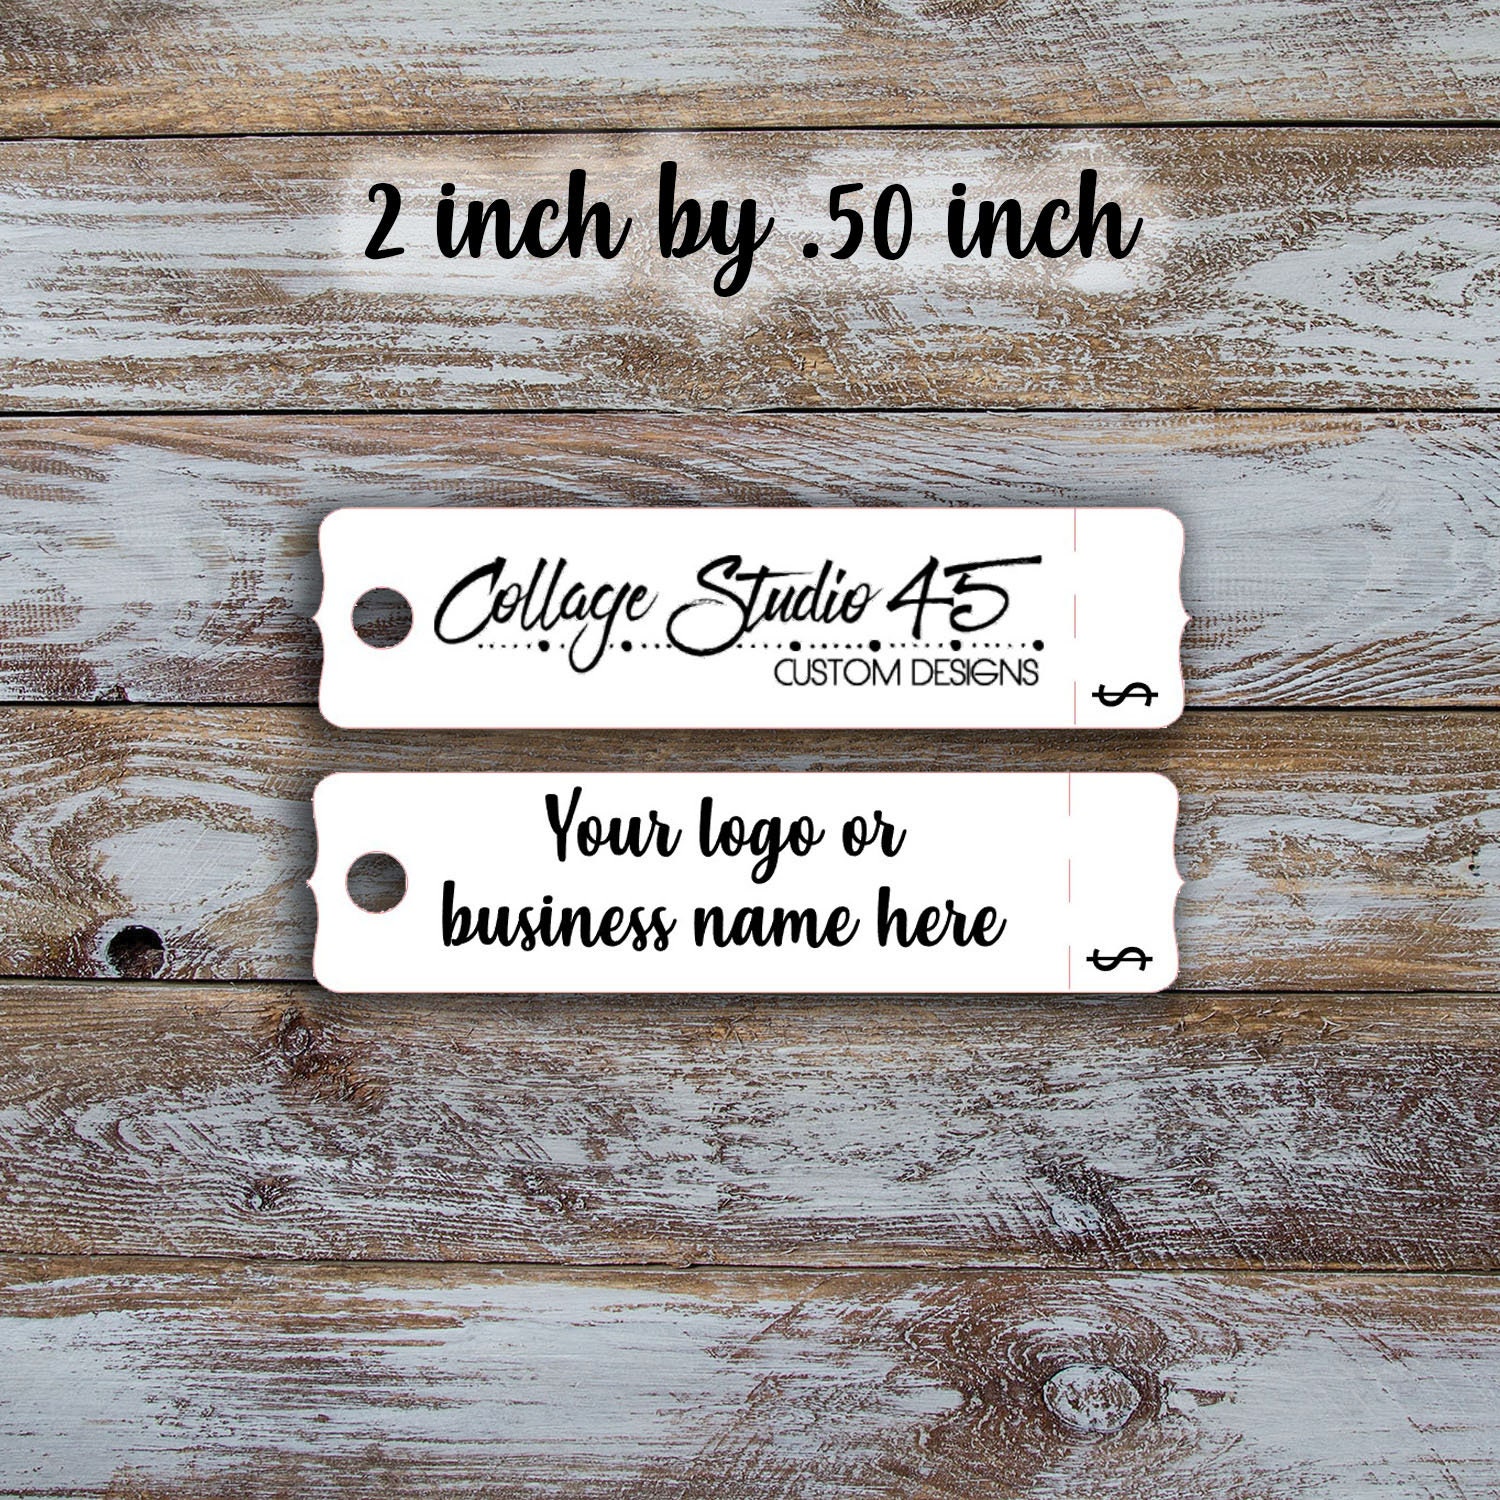 Custom Tags -2.0 Inch By 1.0 Inch, Customized Small Price Tags